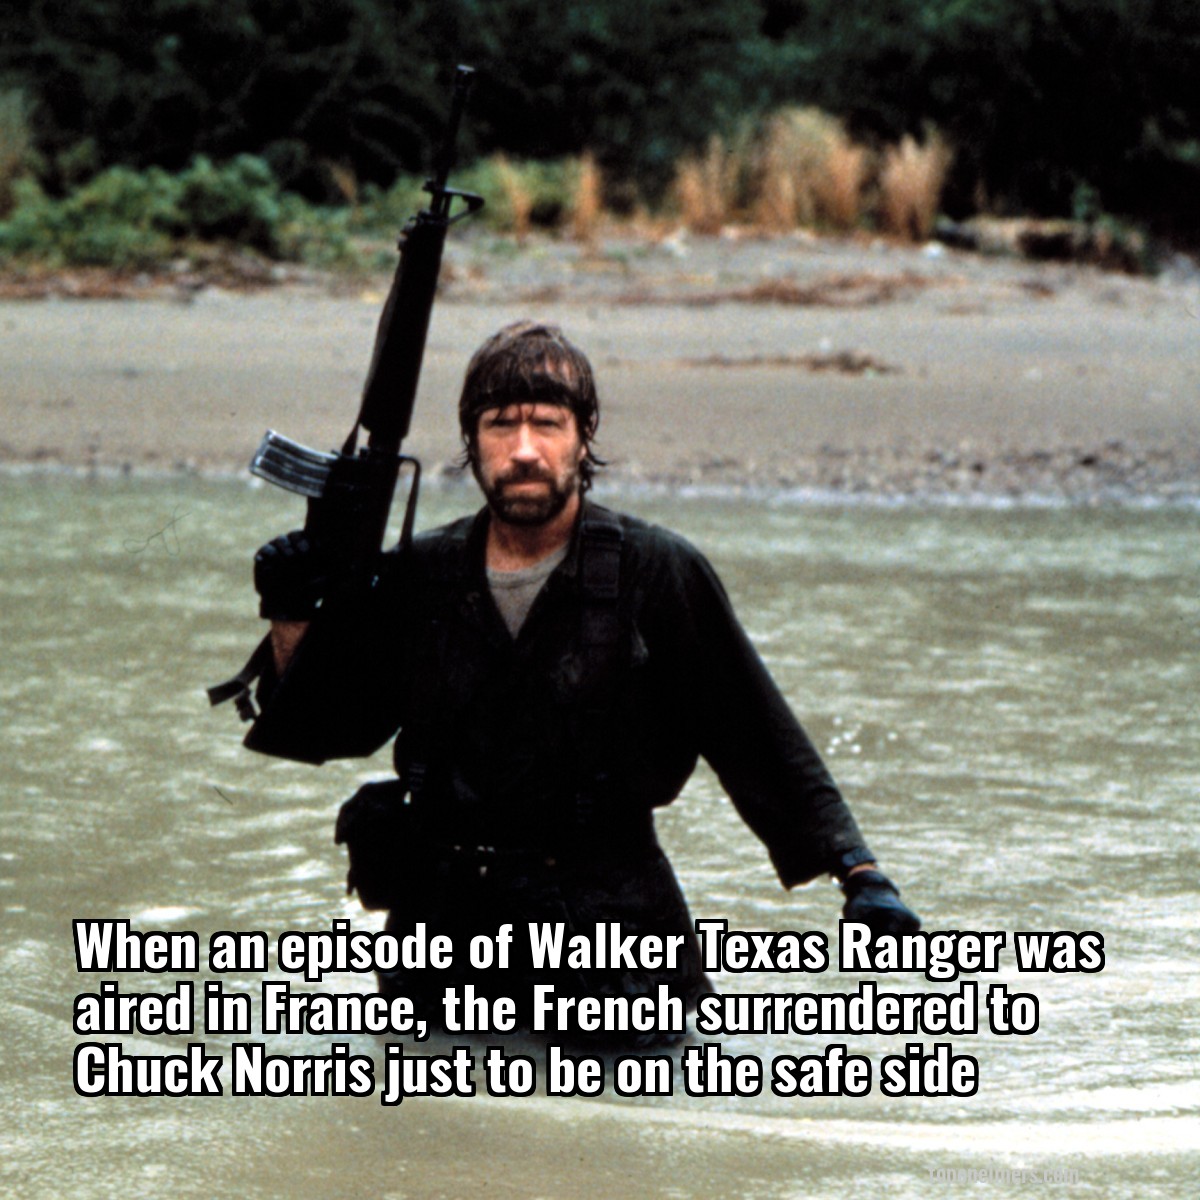 When an episode of Walker Texas Ranger was aired in France, the French surrendered to Chuck Norris just to be on the safe side